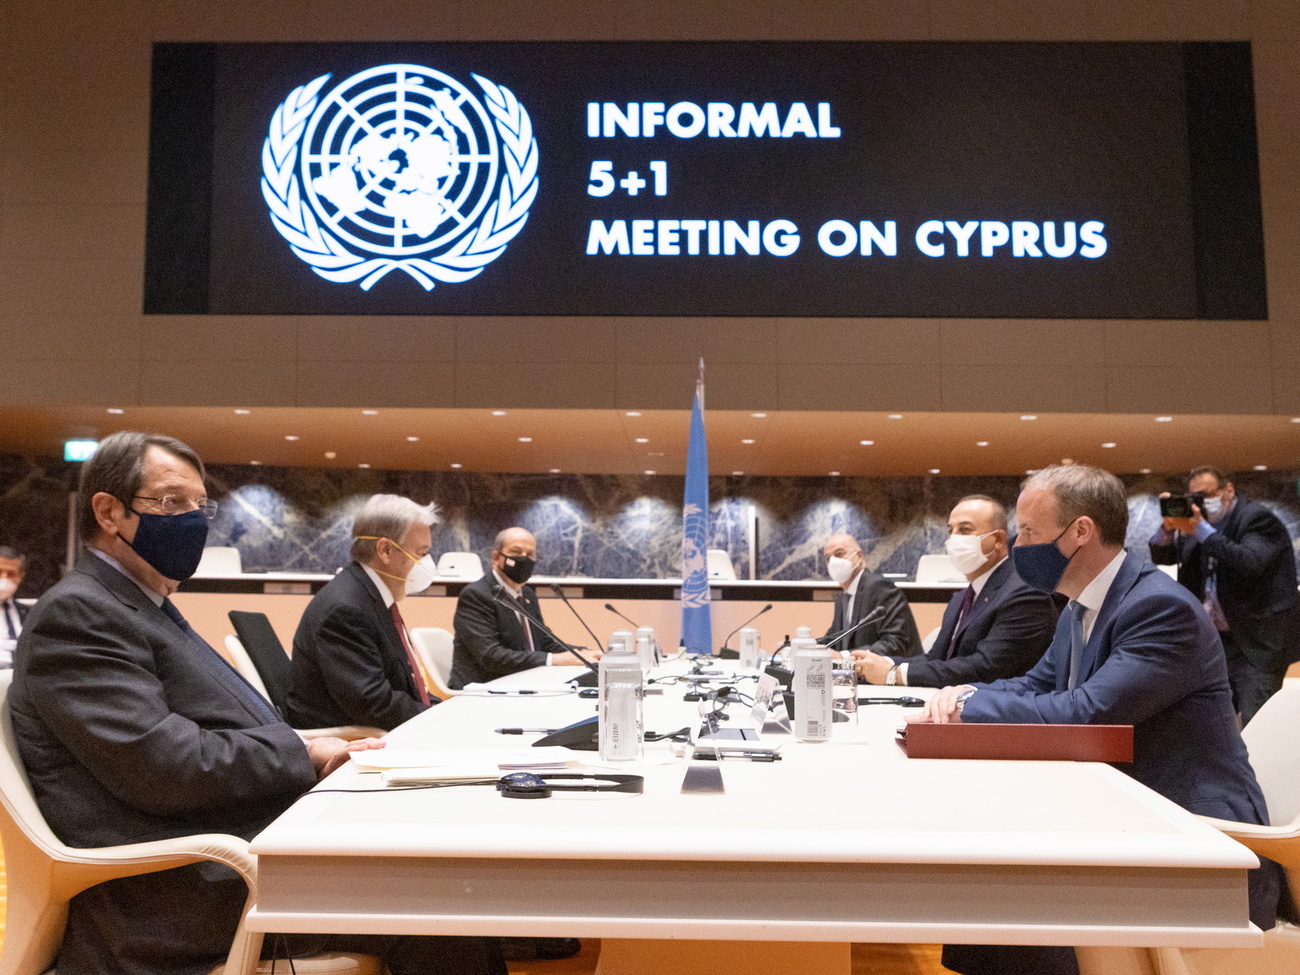 The informal talks on Cyprus were attended in Geneva by various diplomats.